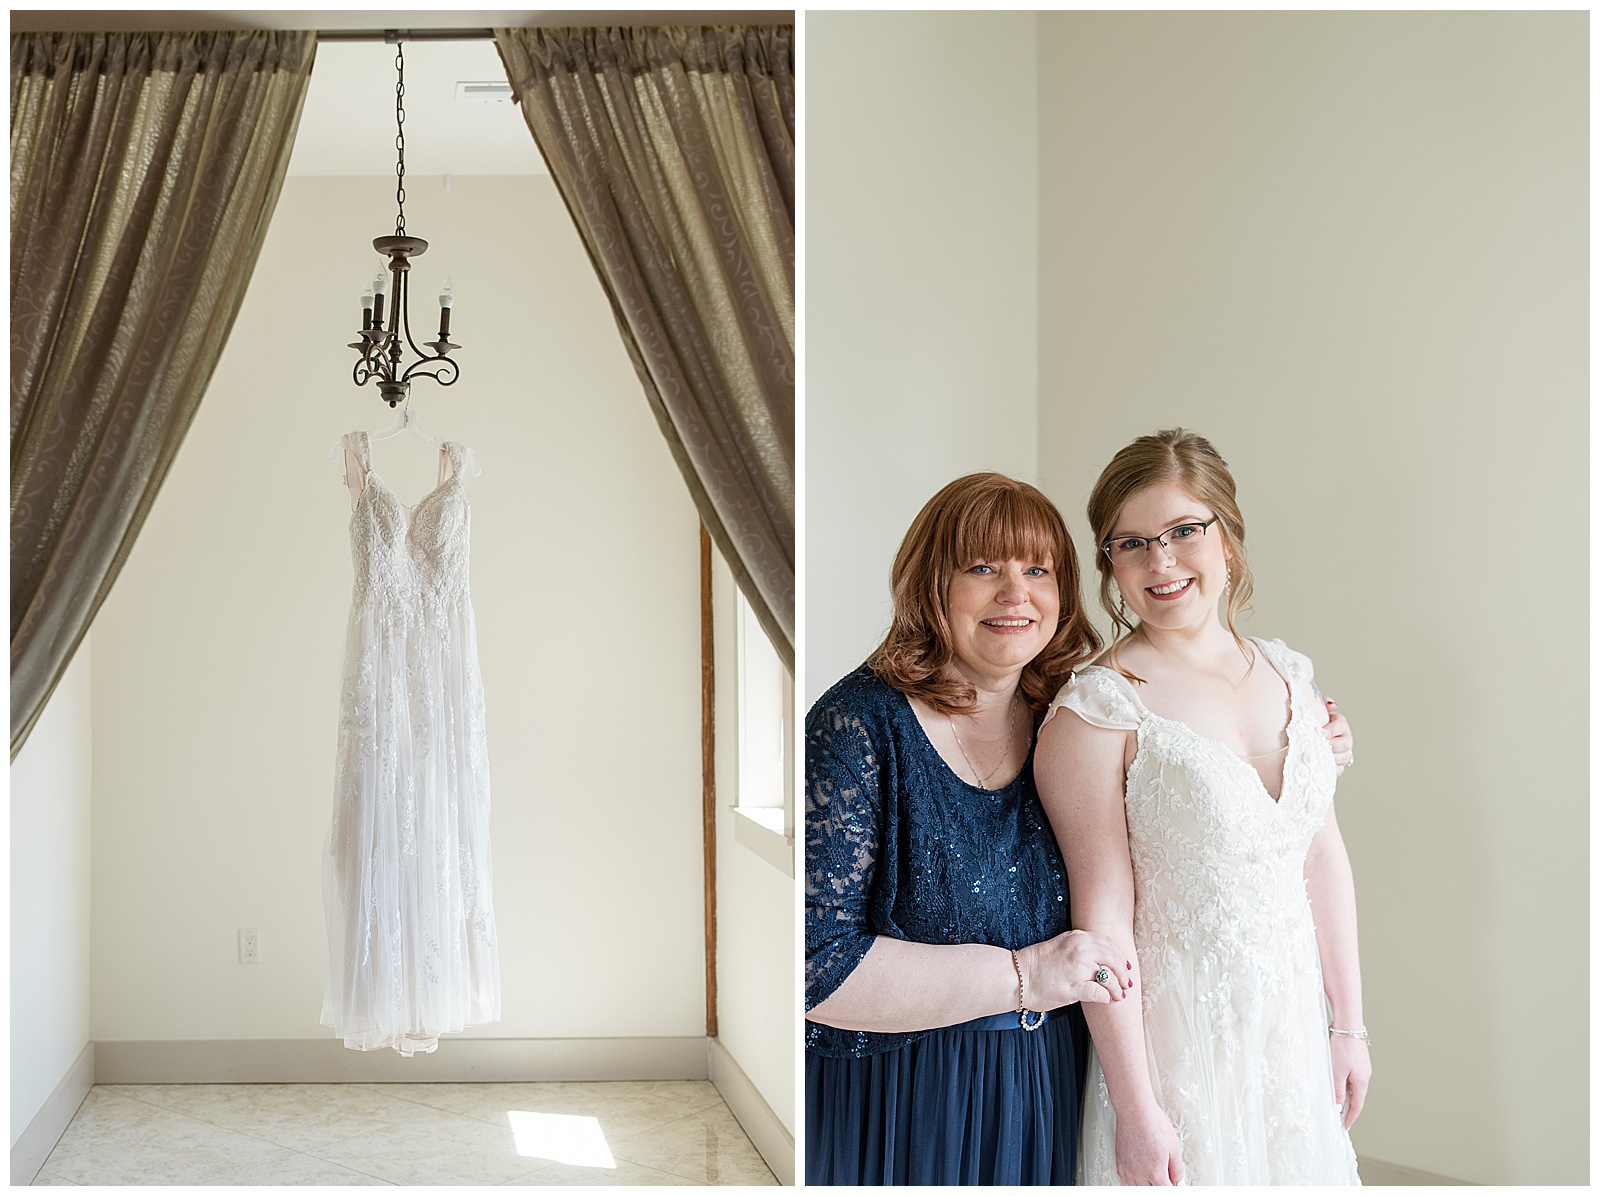 mother of the bride hugging her daughter and looking at the camera smiling inside bridal suite at barn wedding venue